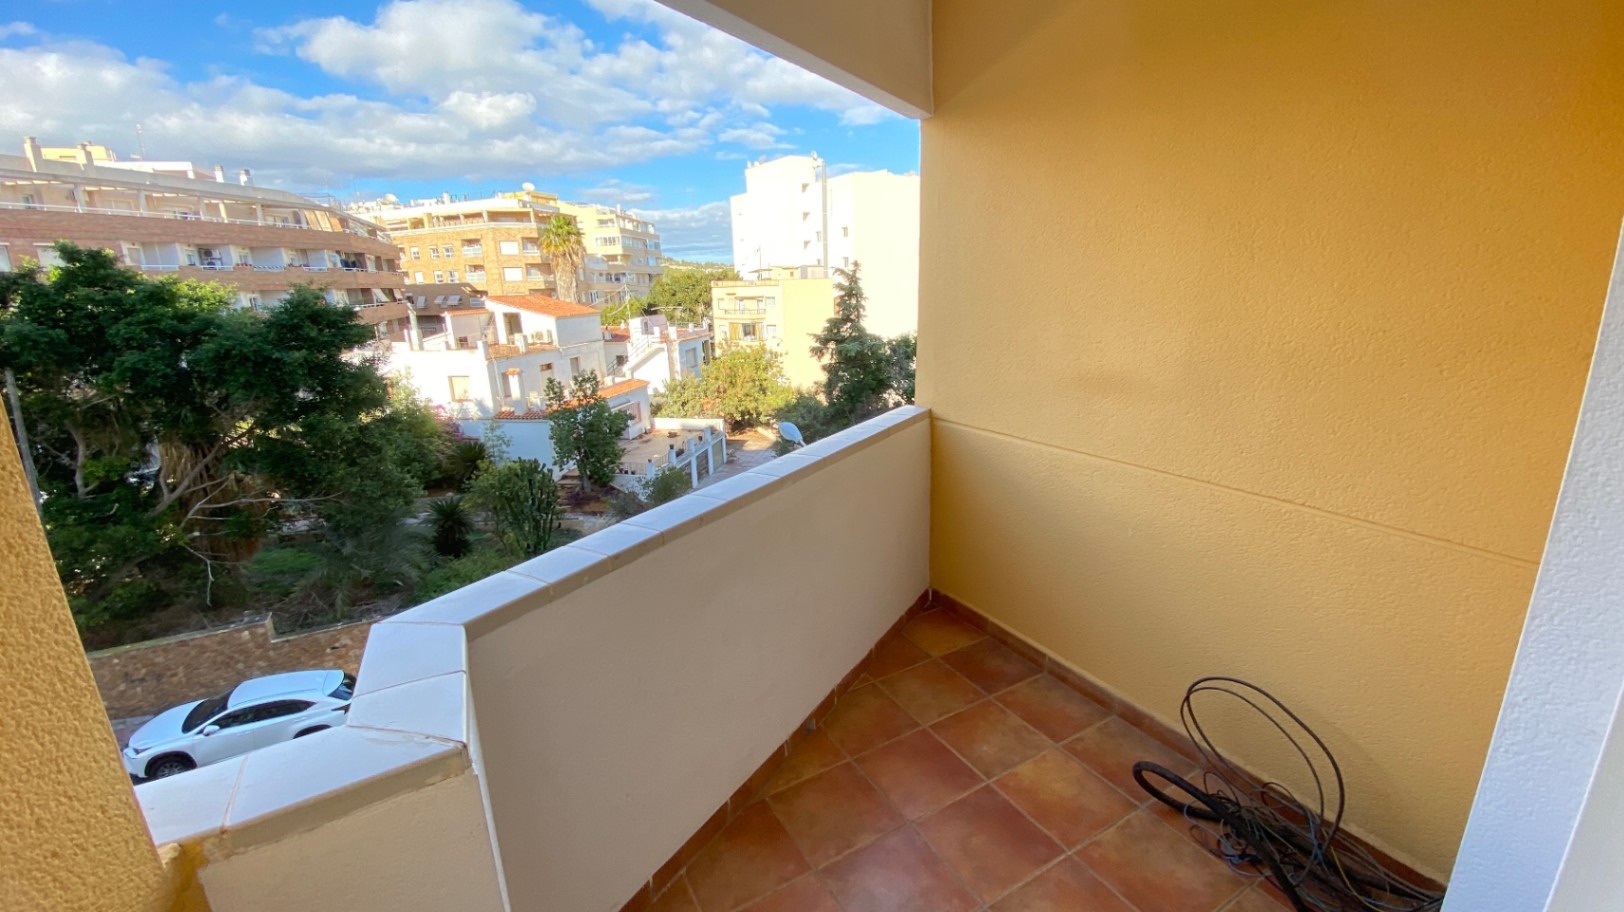 Spacious apartment, 300 meters from Arenal beach in Calpe. The house has an area of 200m2 and consists of 4 bedrooms, 3 bathrooms, large living room, very large independent kitchen, 2 terraces, laundry room. Gas central heating. The building has a communal swimming pool. There is the possibility to buy 2 parking spaces for €25,000 each.